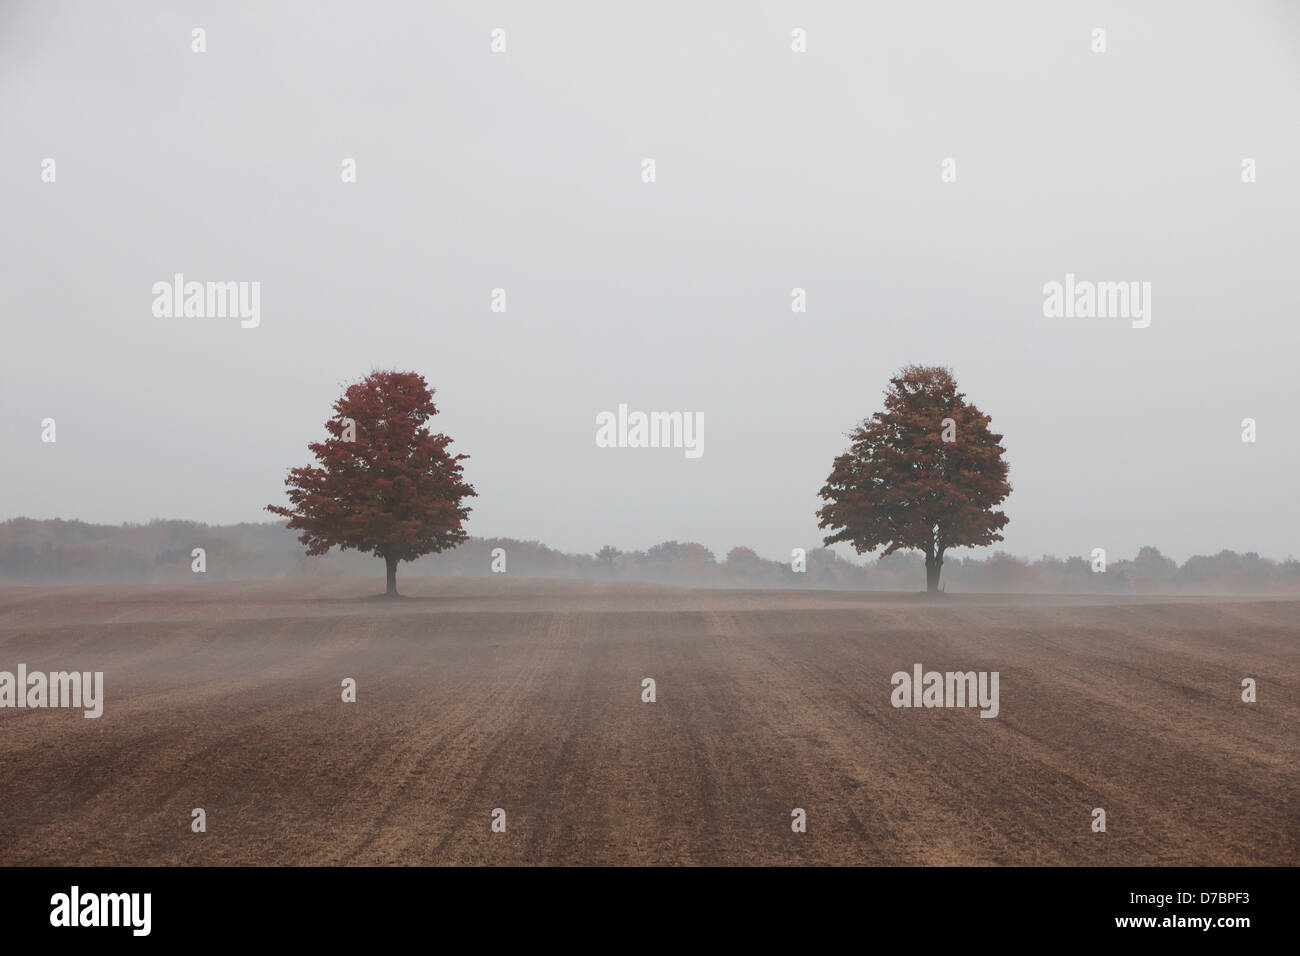 Two Trees In A Farm Field In Autumn;Caledon Ontario Canada Stock Photo